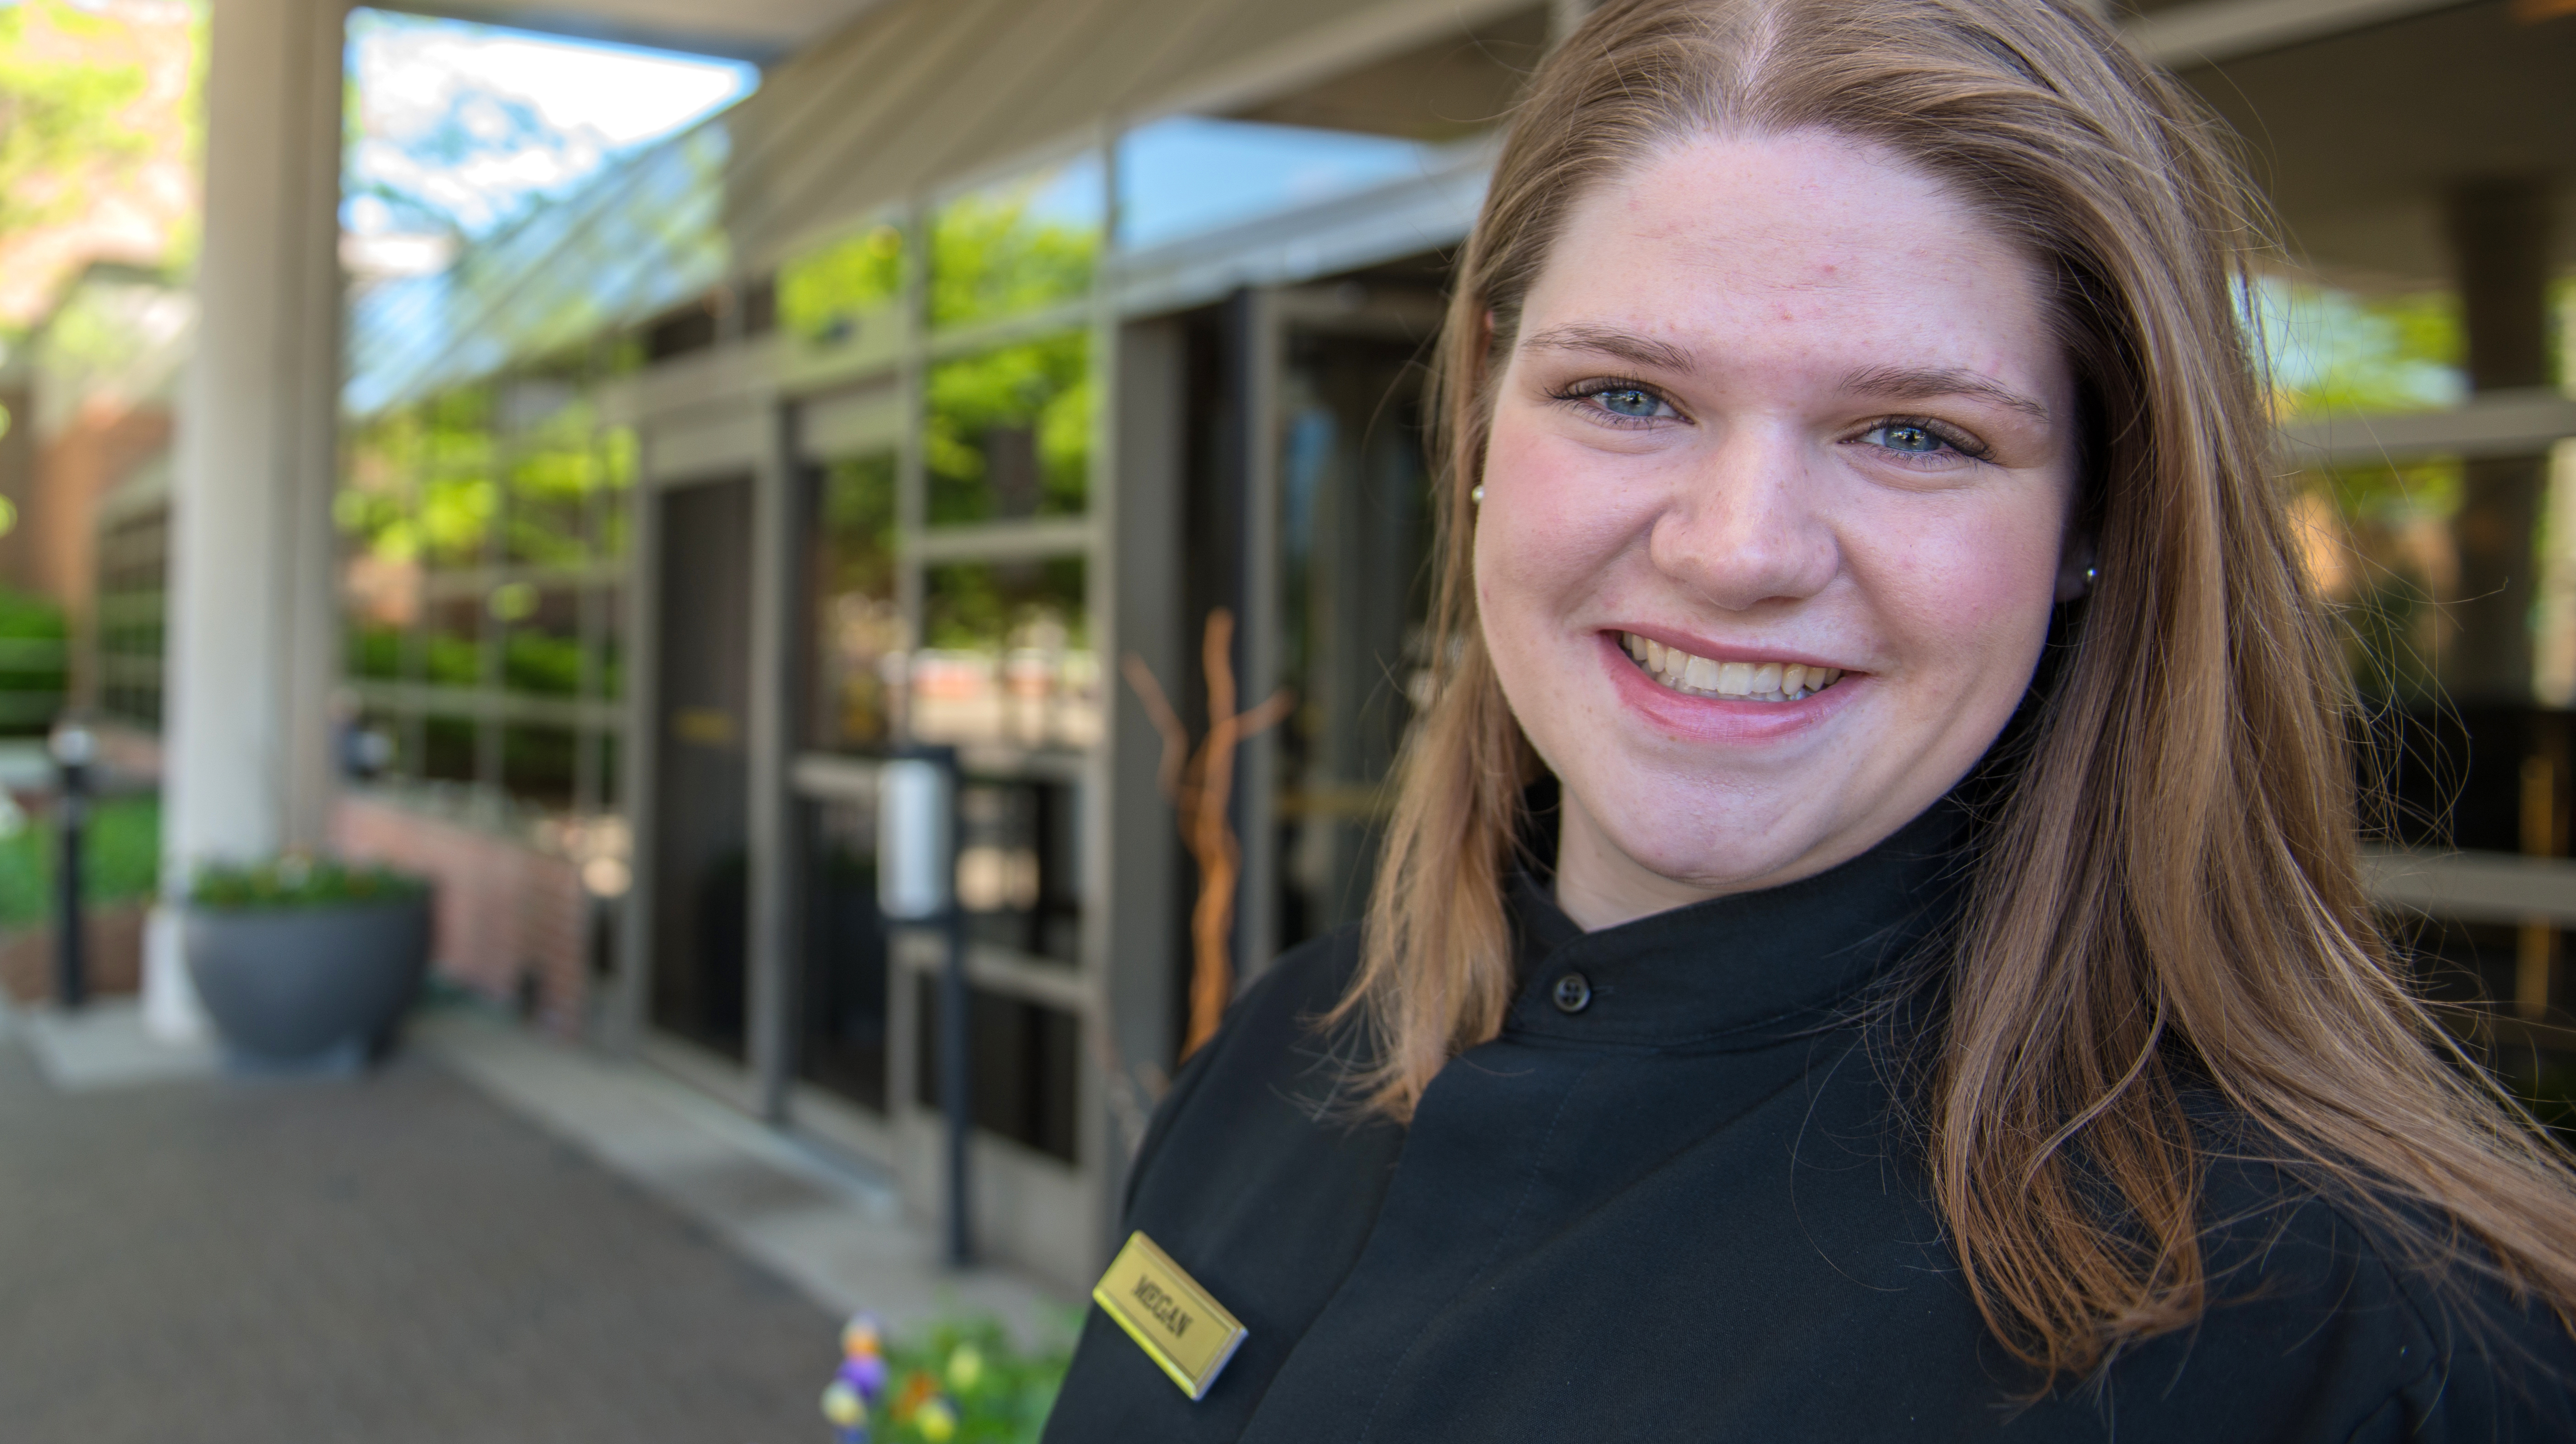 A smiling hospitality major stands outside the entrance to a hotel lobby, wearing black clothes and a name tag.